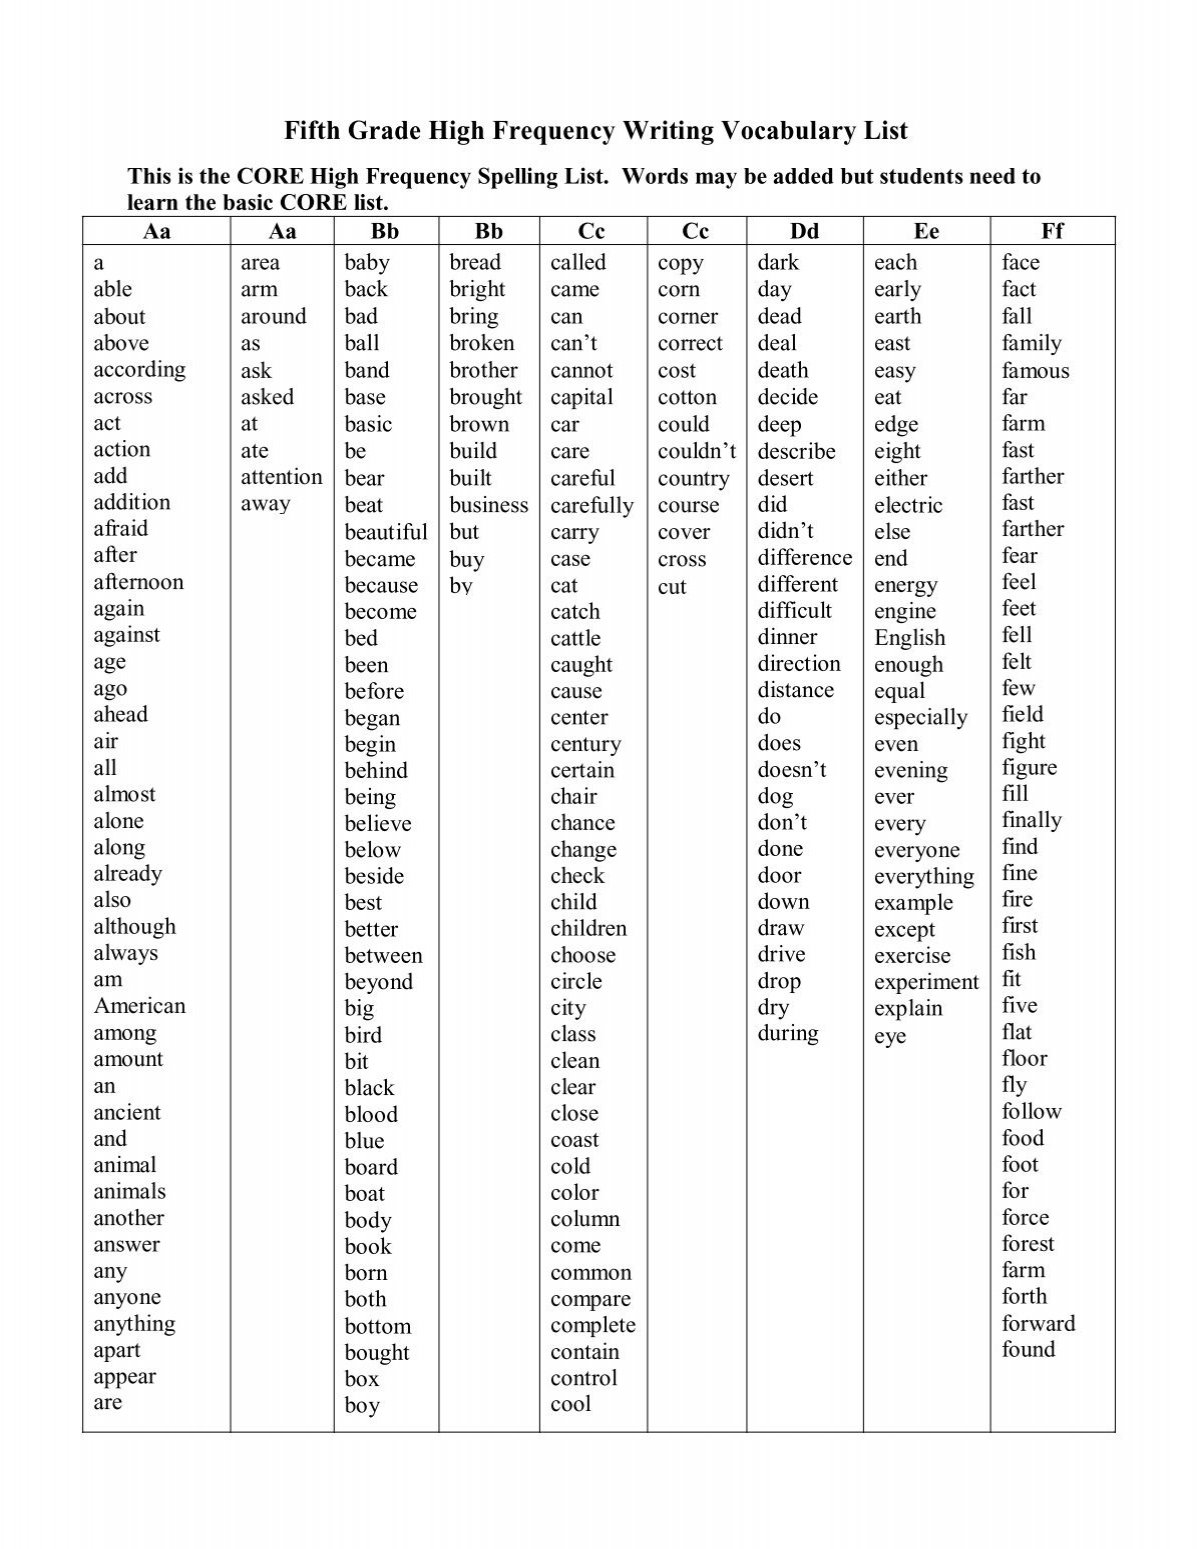 fifth-grade-high-frequency-writing-vocabulary-list-puetechnology